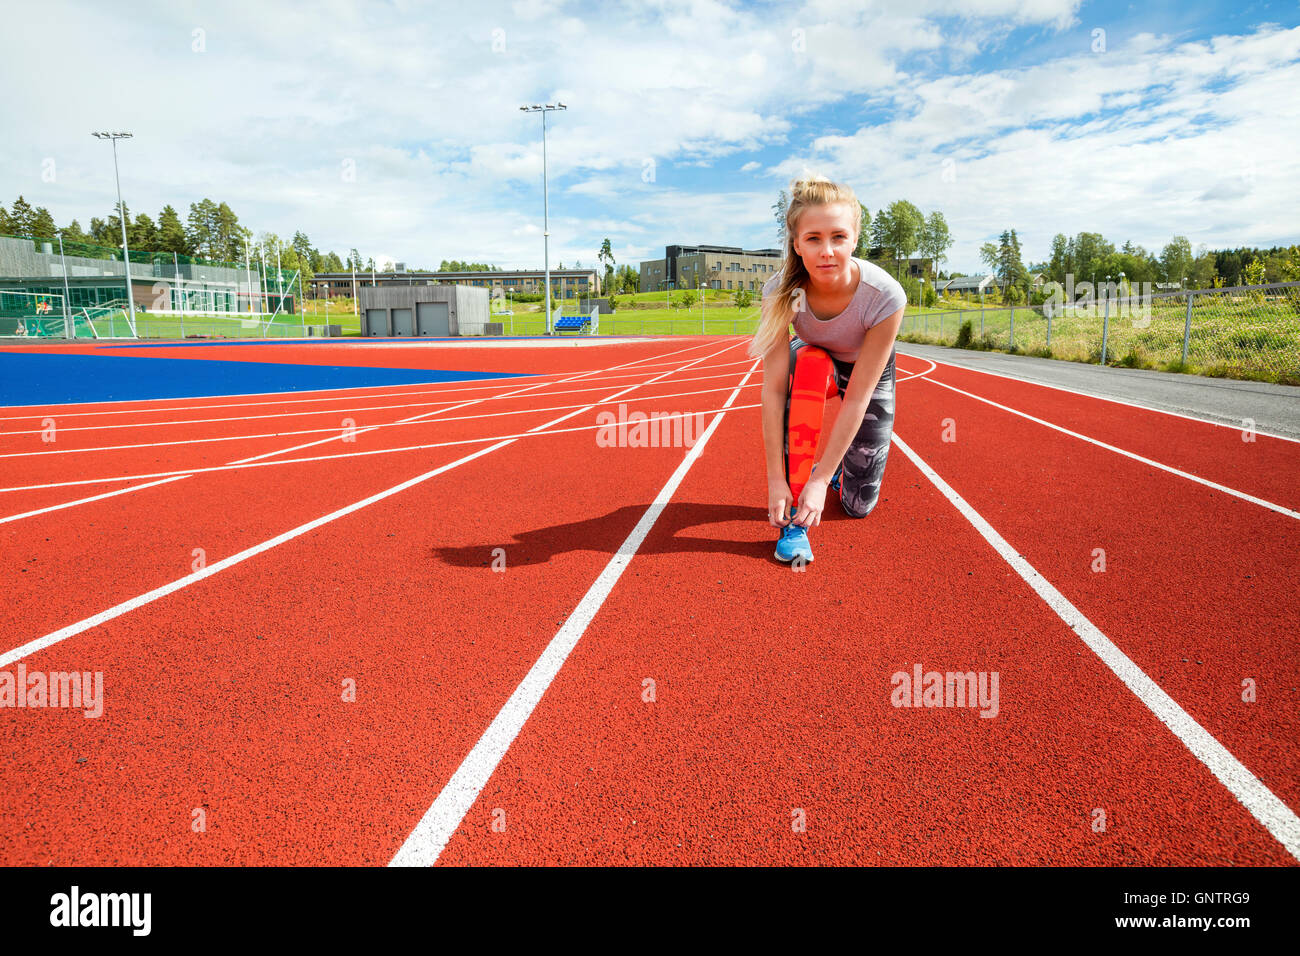 Confident Woman Tying Shoelace On Running Tracks Stock Photo